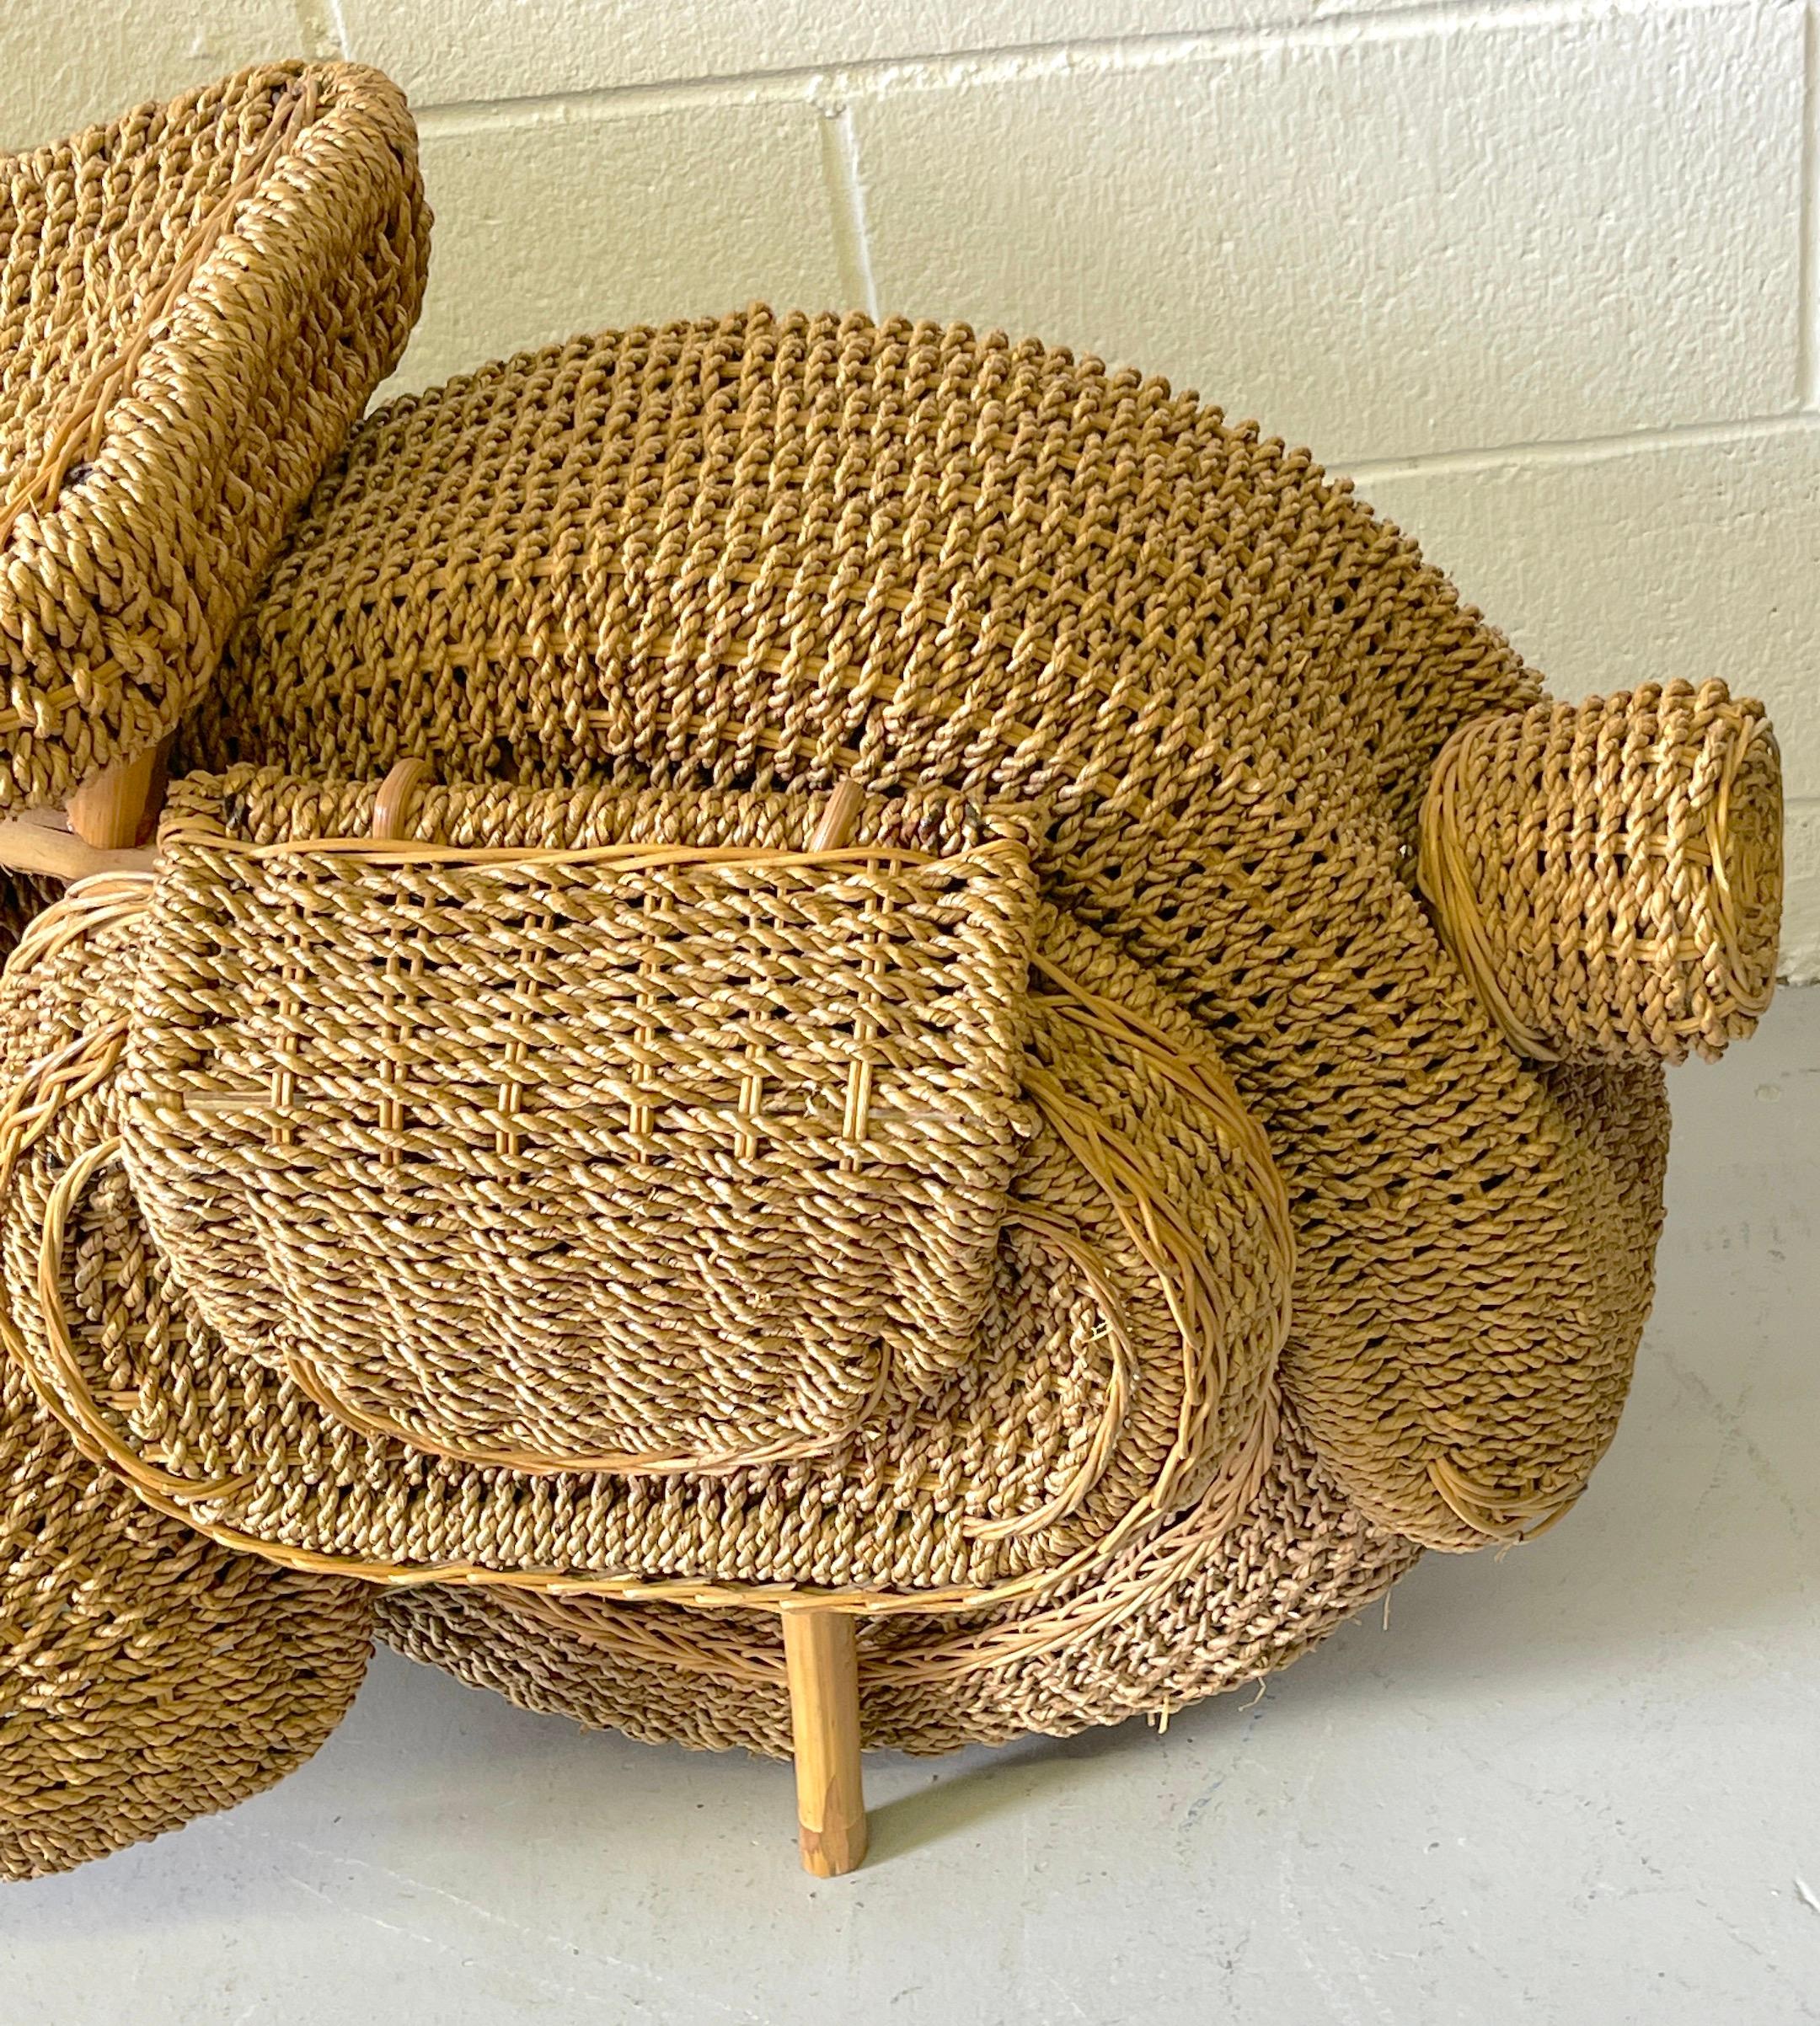 Life Size Harley Davidson Rattan Model of a Motorcycle, Attributed to Tom Dixon For Sale 2